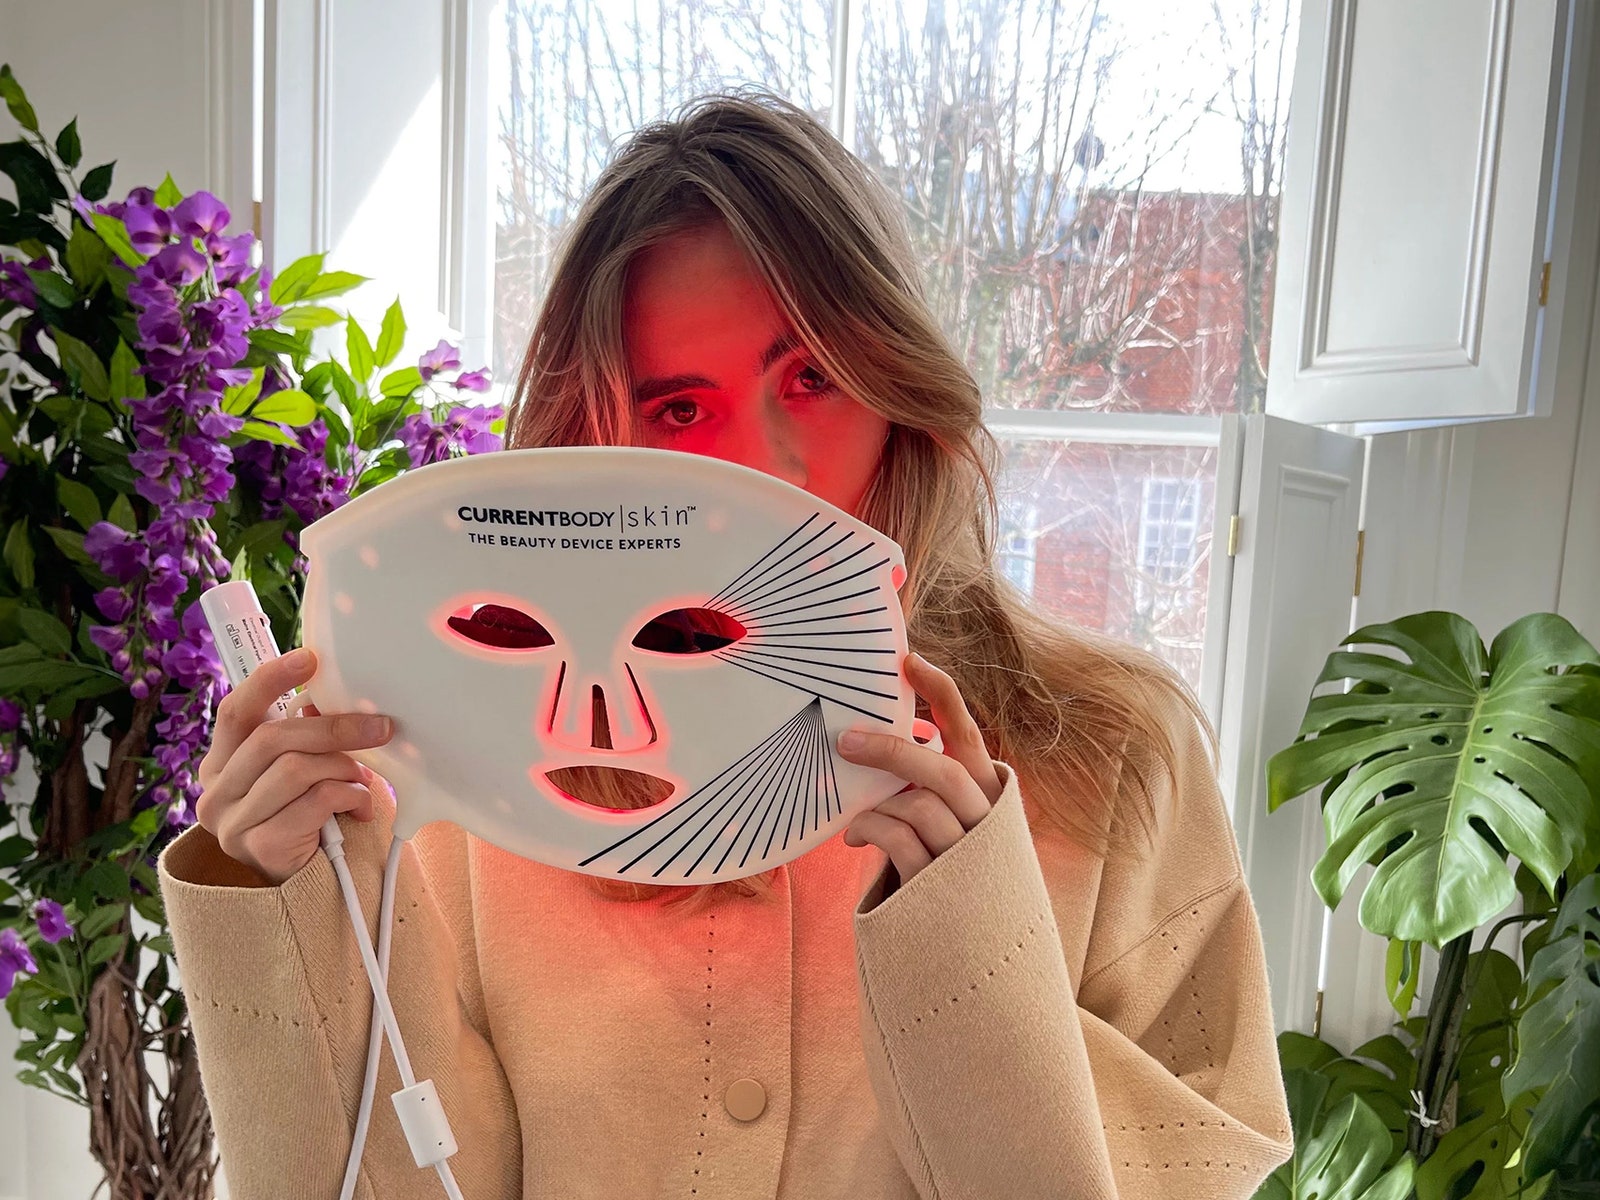 I tried the Currentbody LED face mask and it controlled my hormonal breakouts like nothing else